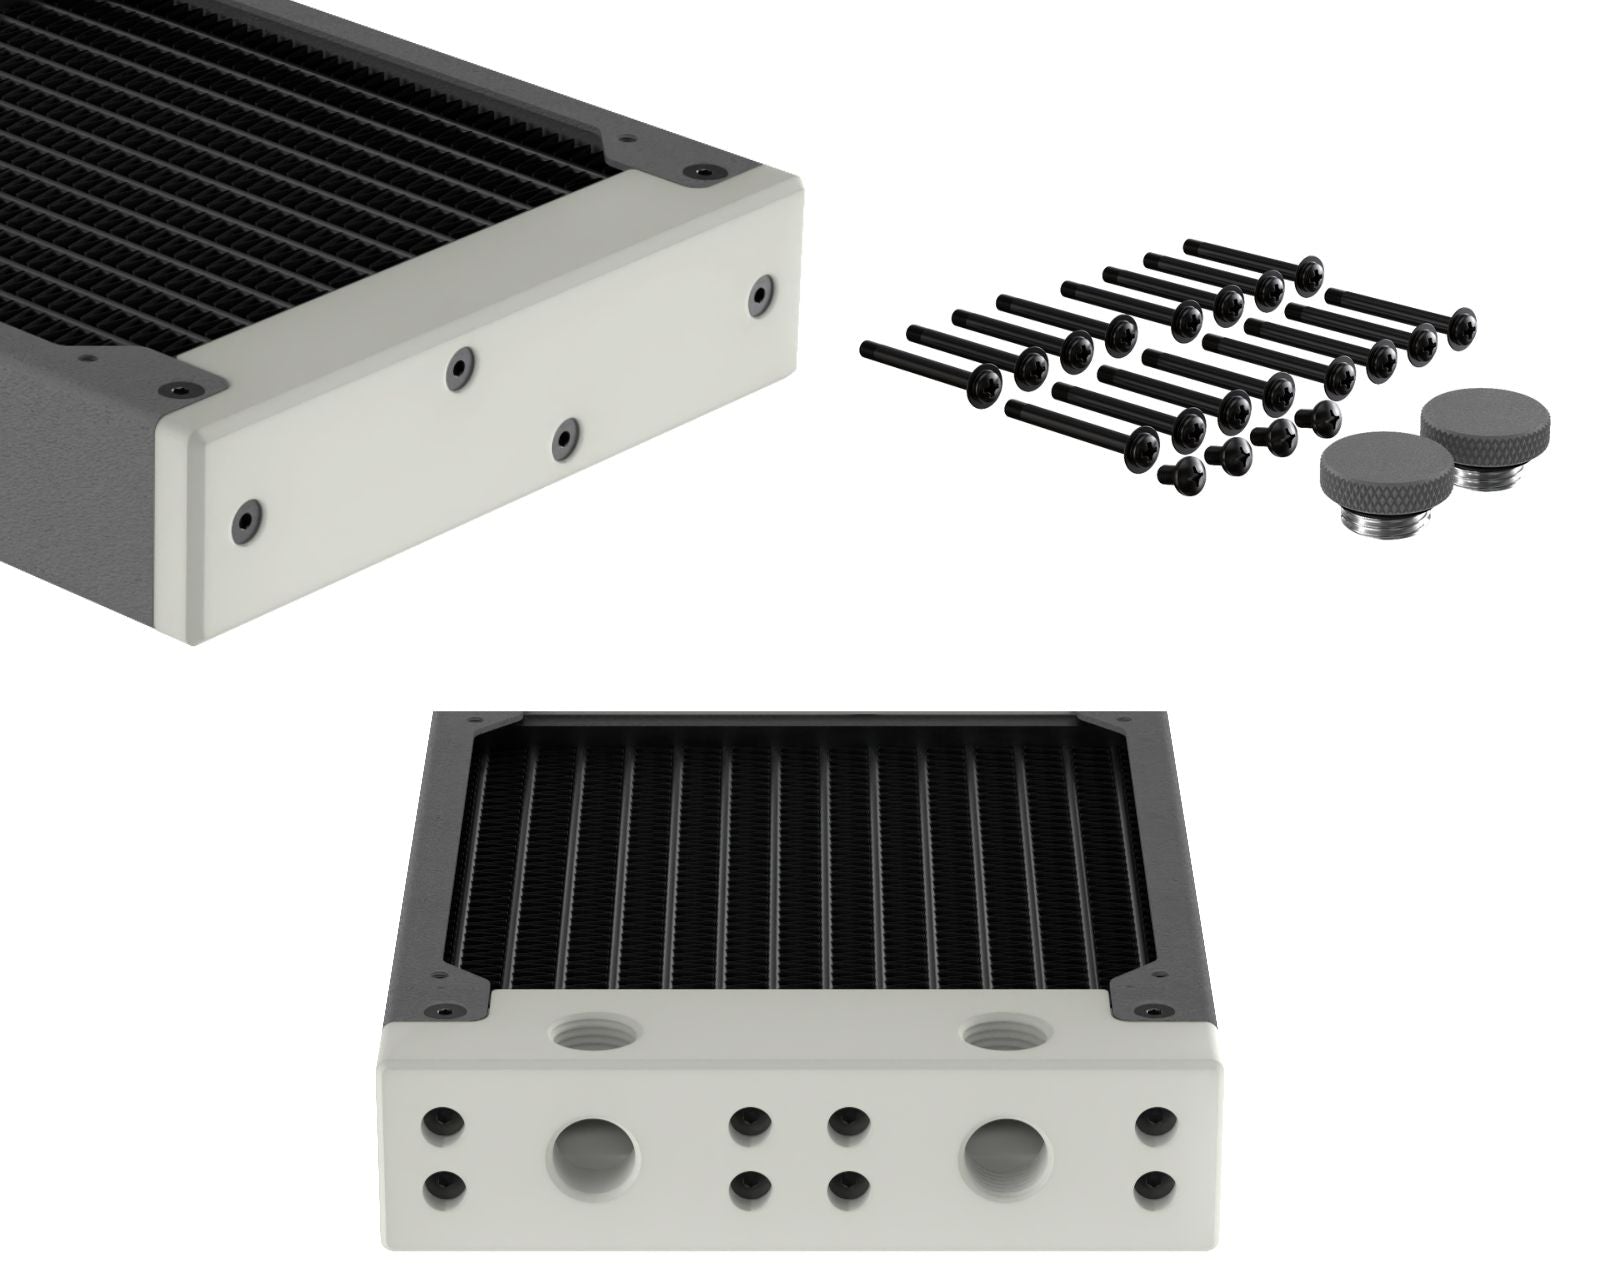 PrimoChill 480SL (30mm) EXIMO Modular Radiator, White POM, 4x120mm, Quad Fan (R-SL-W48) Available in 20+ Colors, Assembled in USA and Custom Watercooling Loop Ready - TX Matte Gun Metal